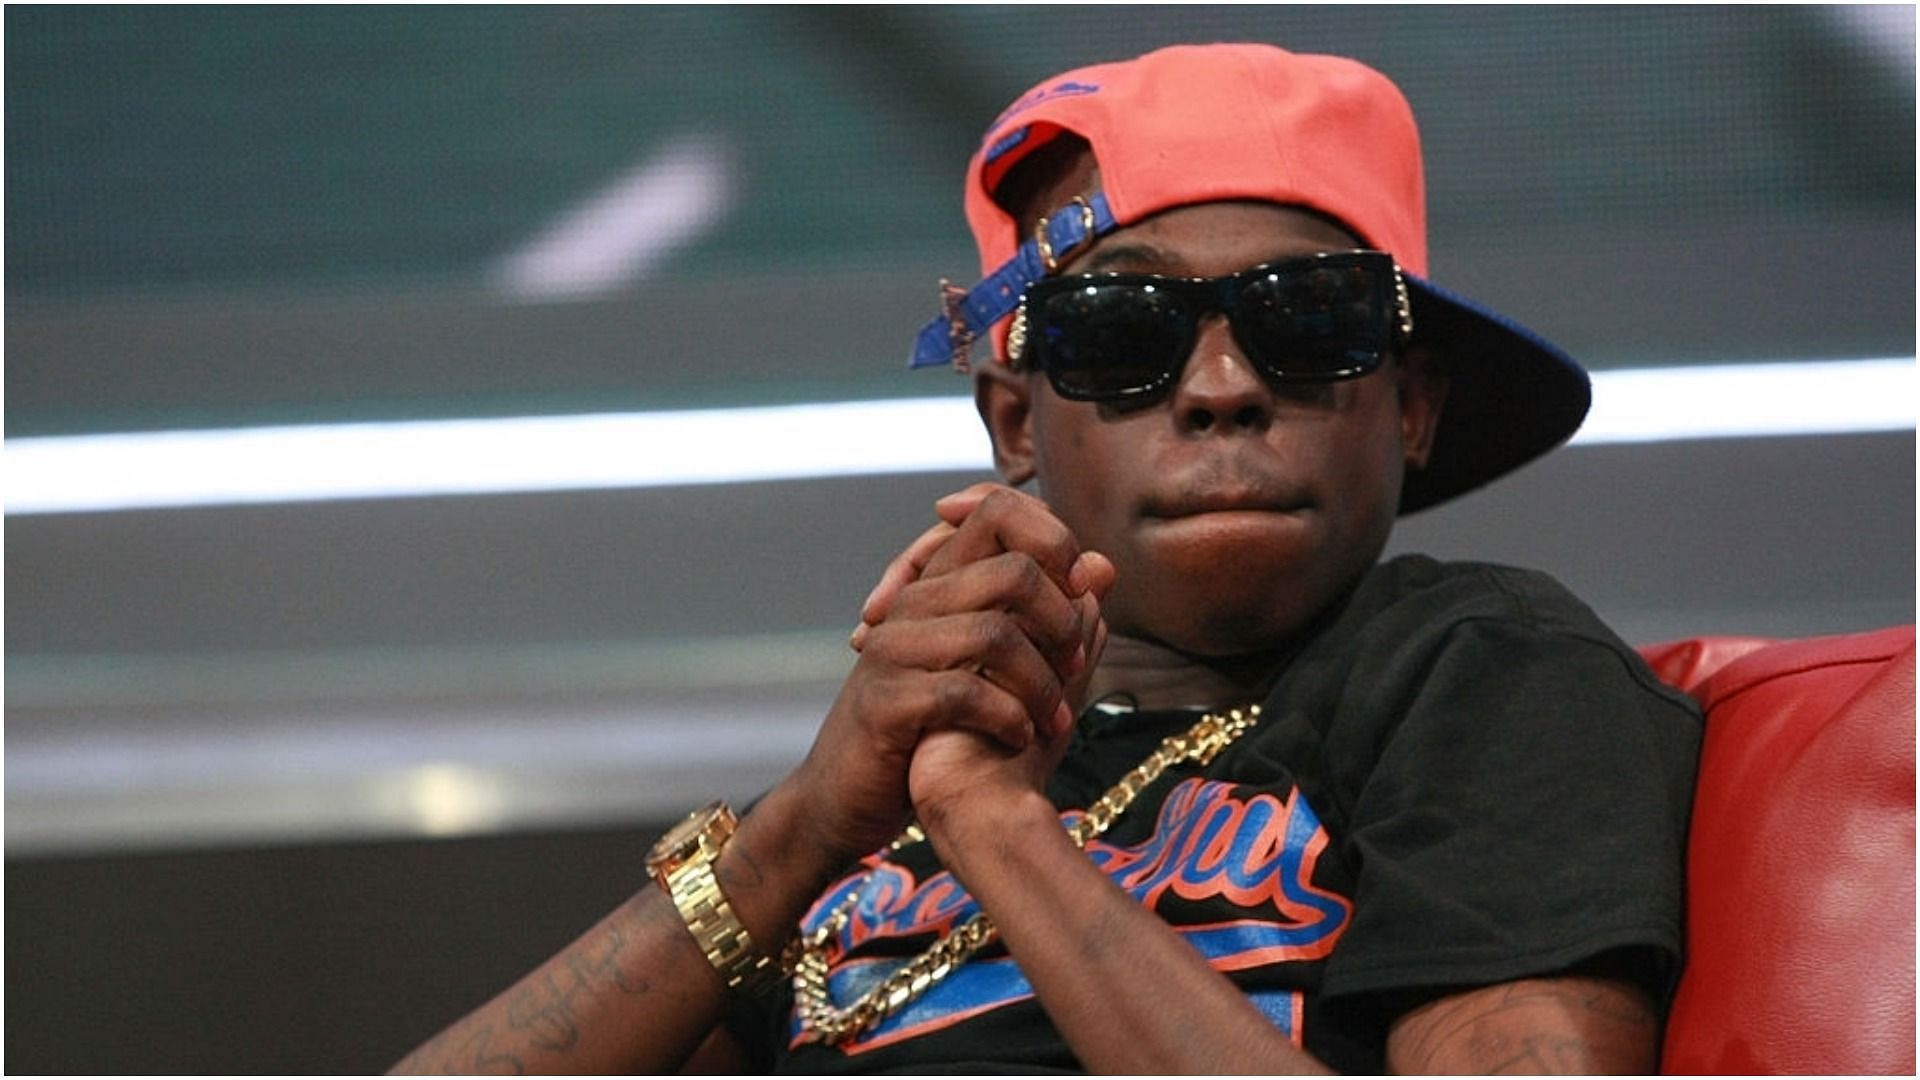 Bobby Shmurda was signed with Epic Records in 2014 (Image via Bennett Raglin/Getty Images)